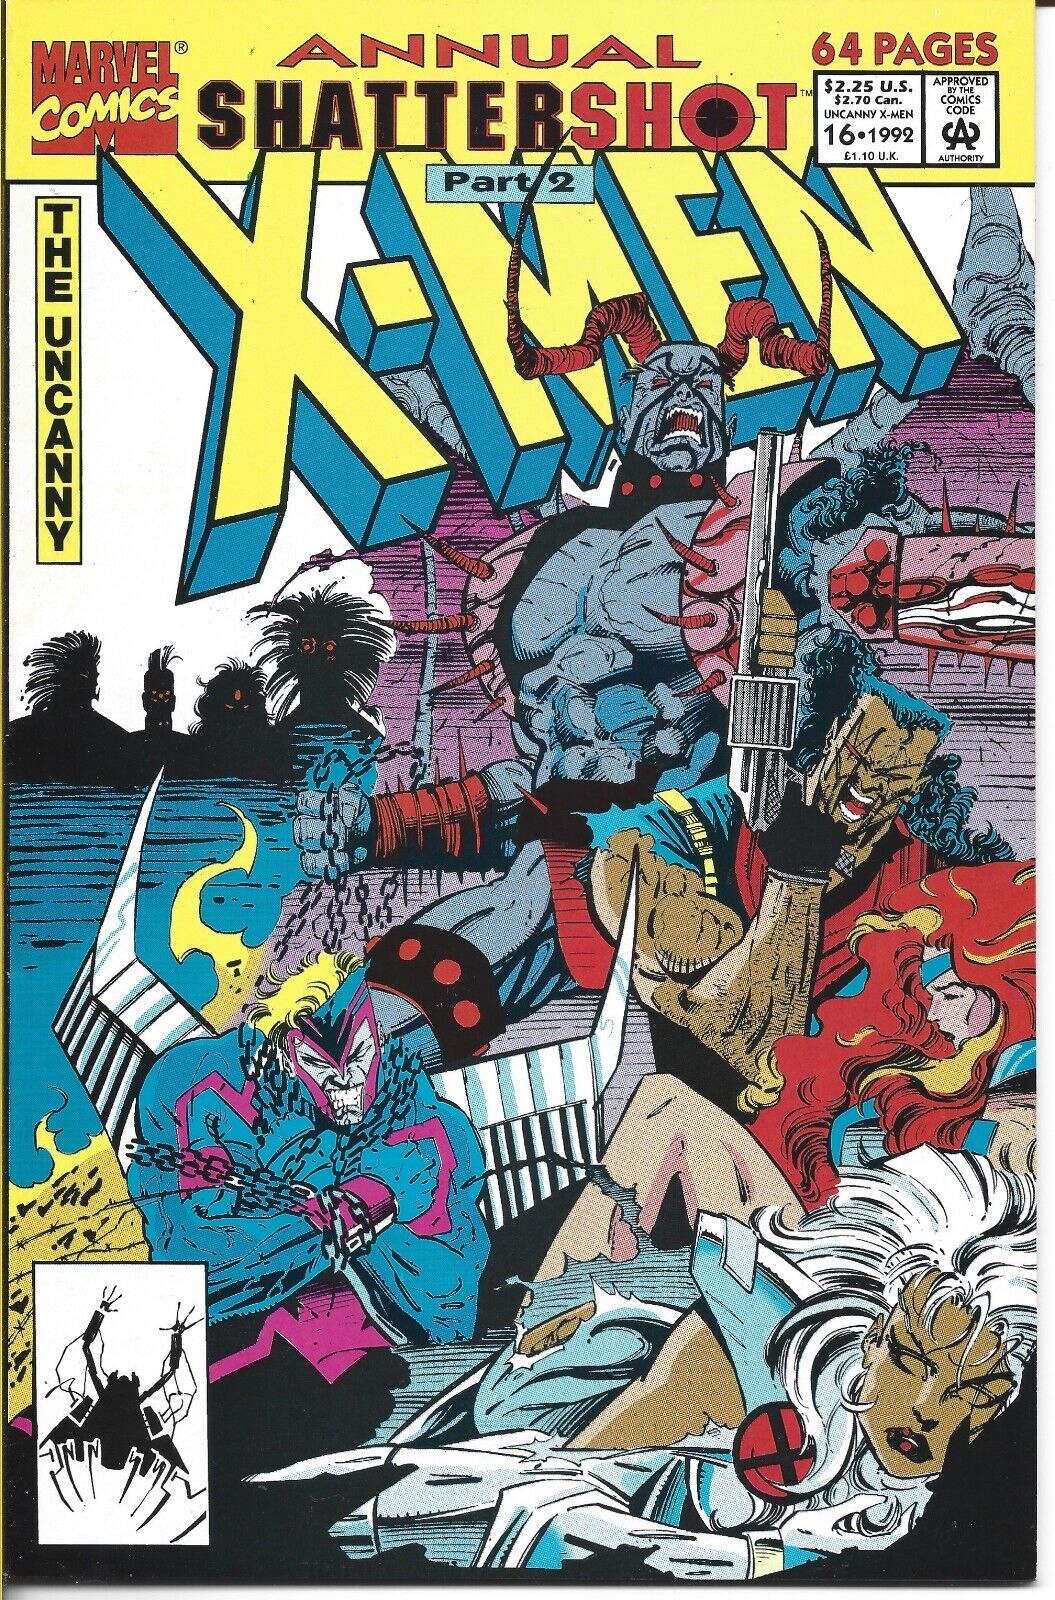 THE UNCANNY X-MEN ANNUAL #16 MARVEL COMICS 1992 BAGGED AND BOARDED